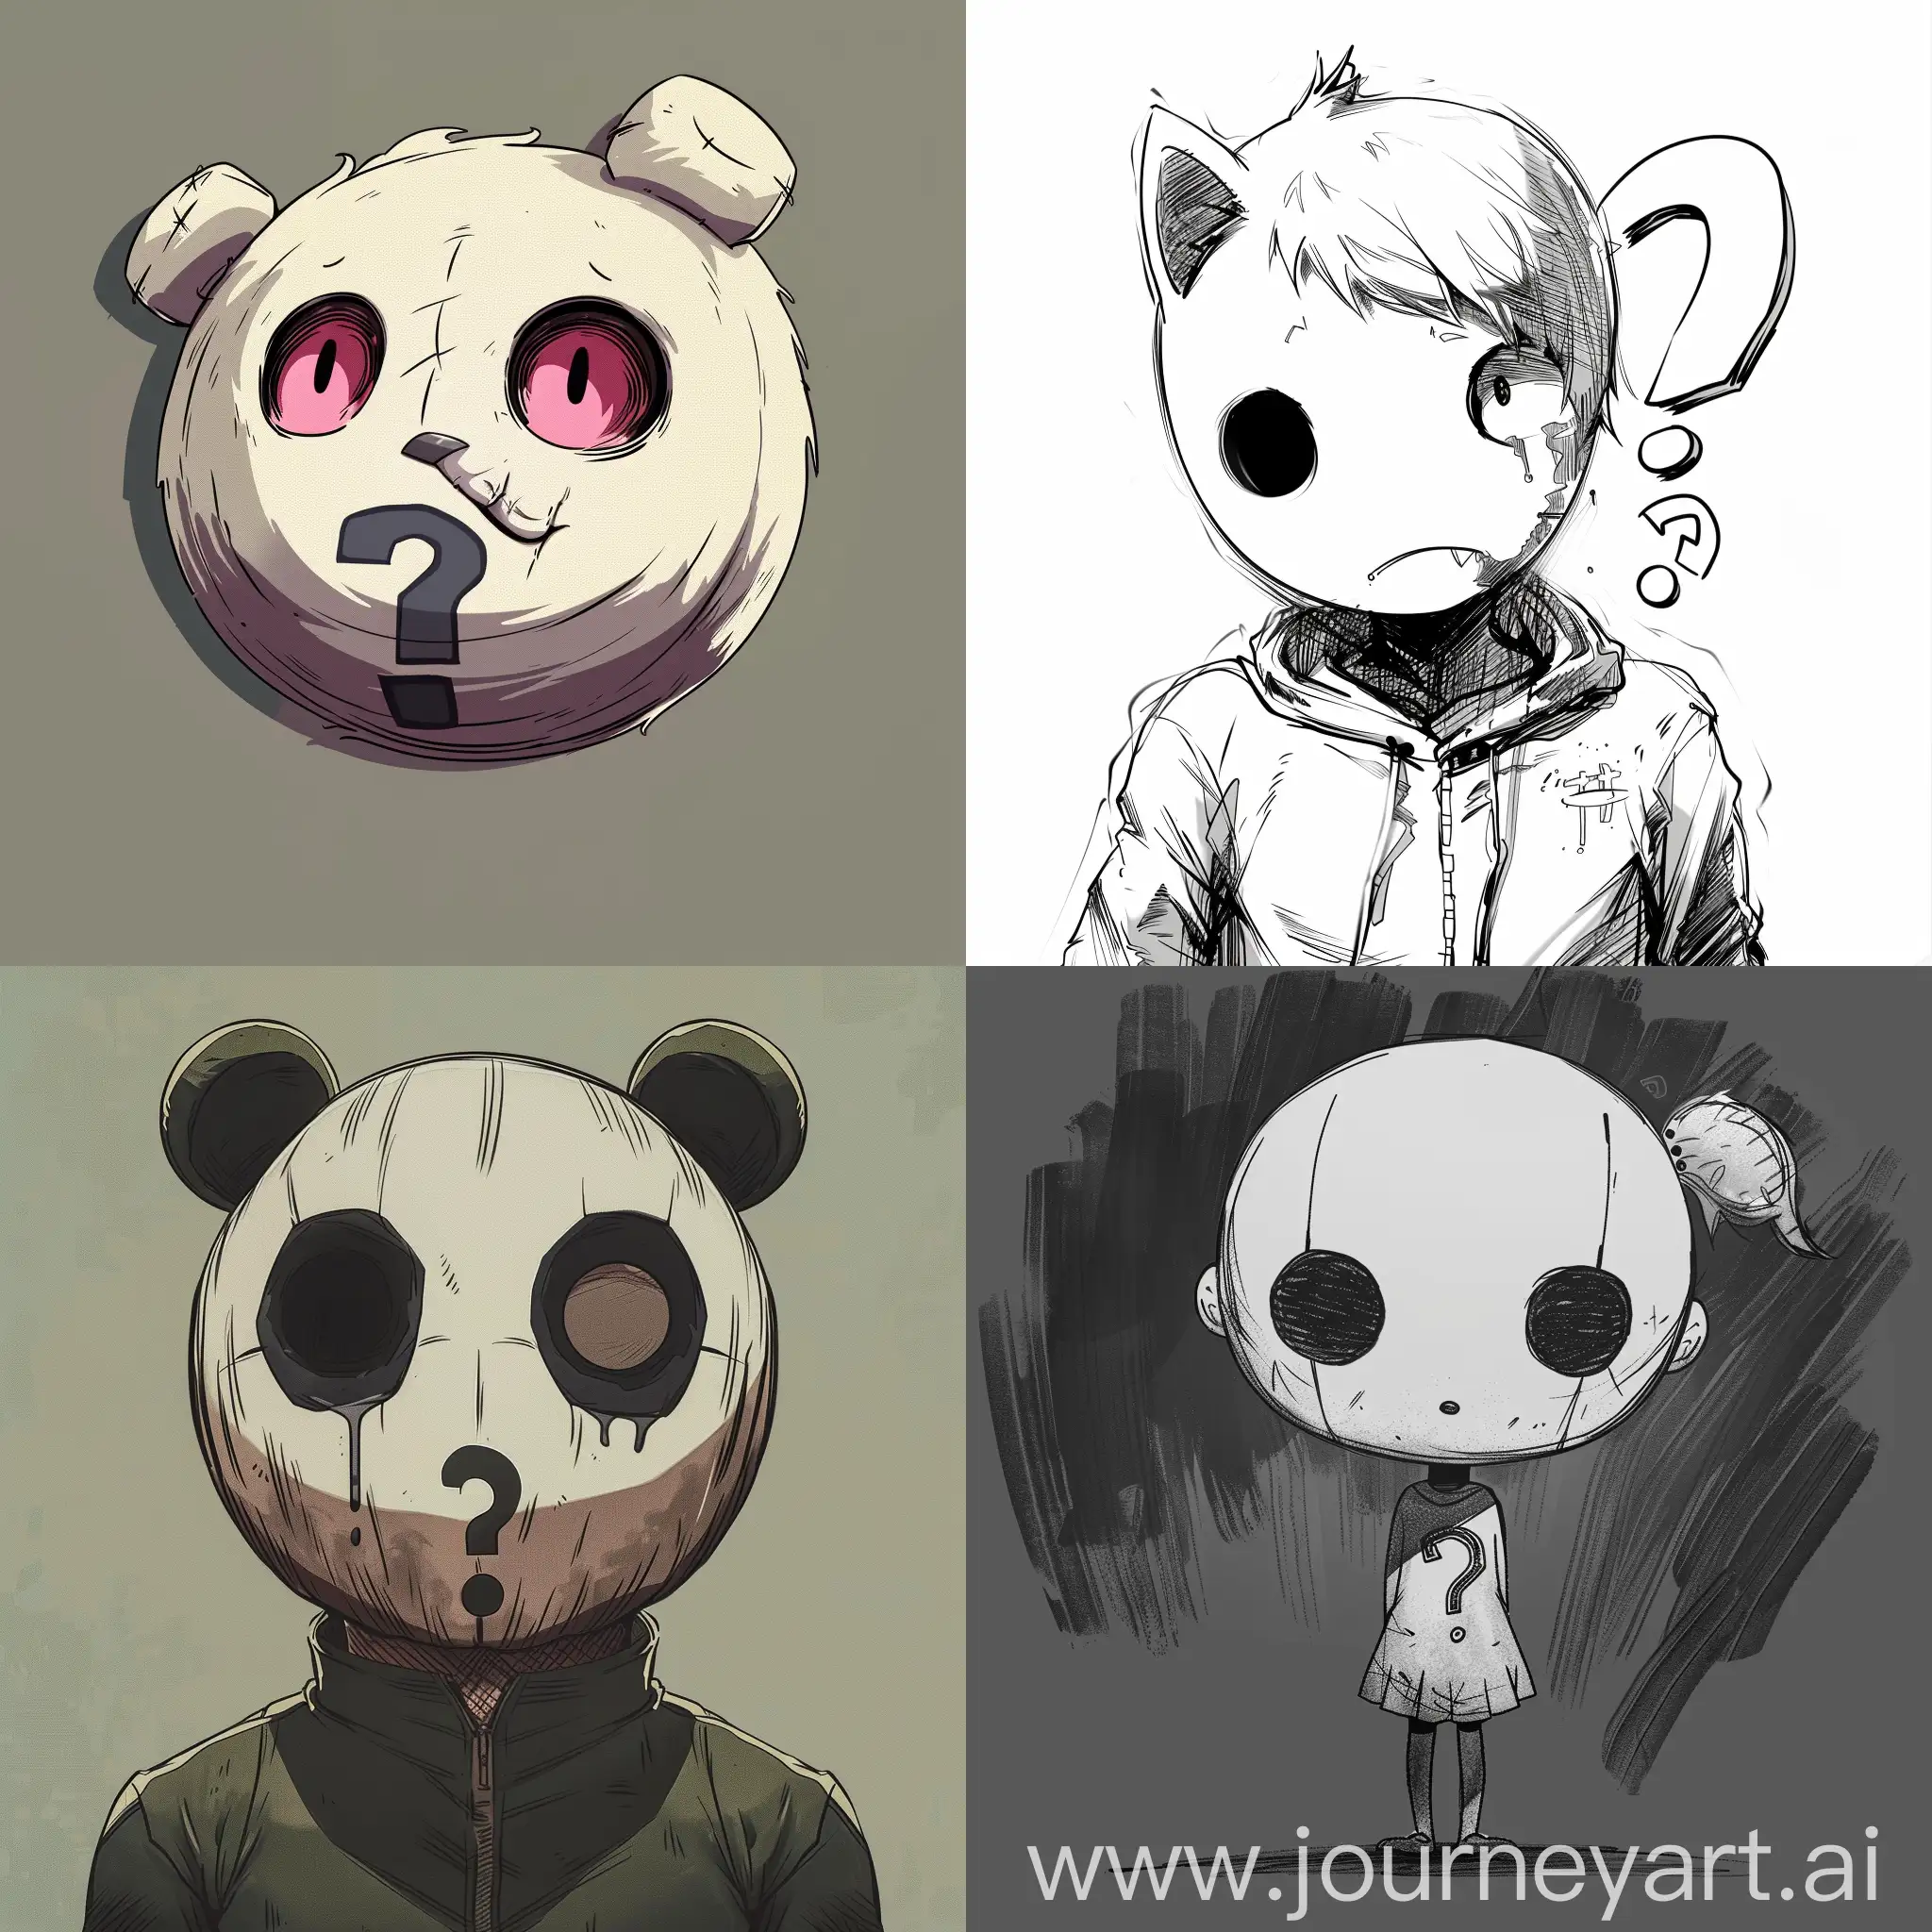 Mysterious-Animal-and-Question-Mark-Faces-in-Danganronpa-Style-Art